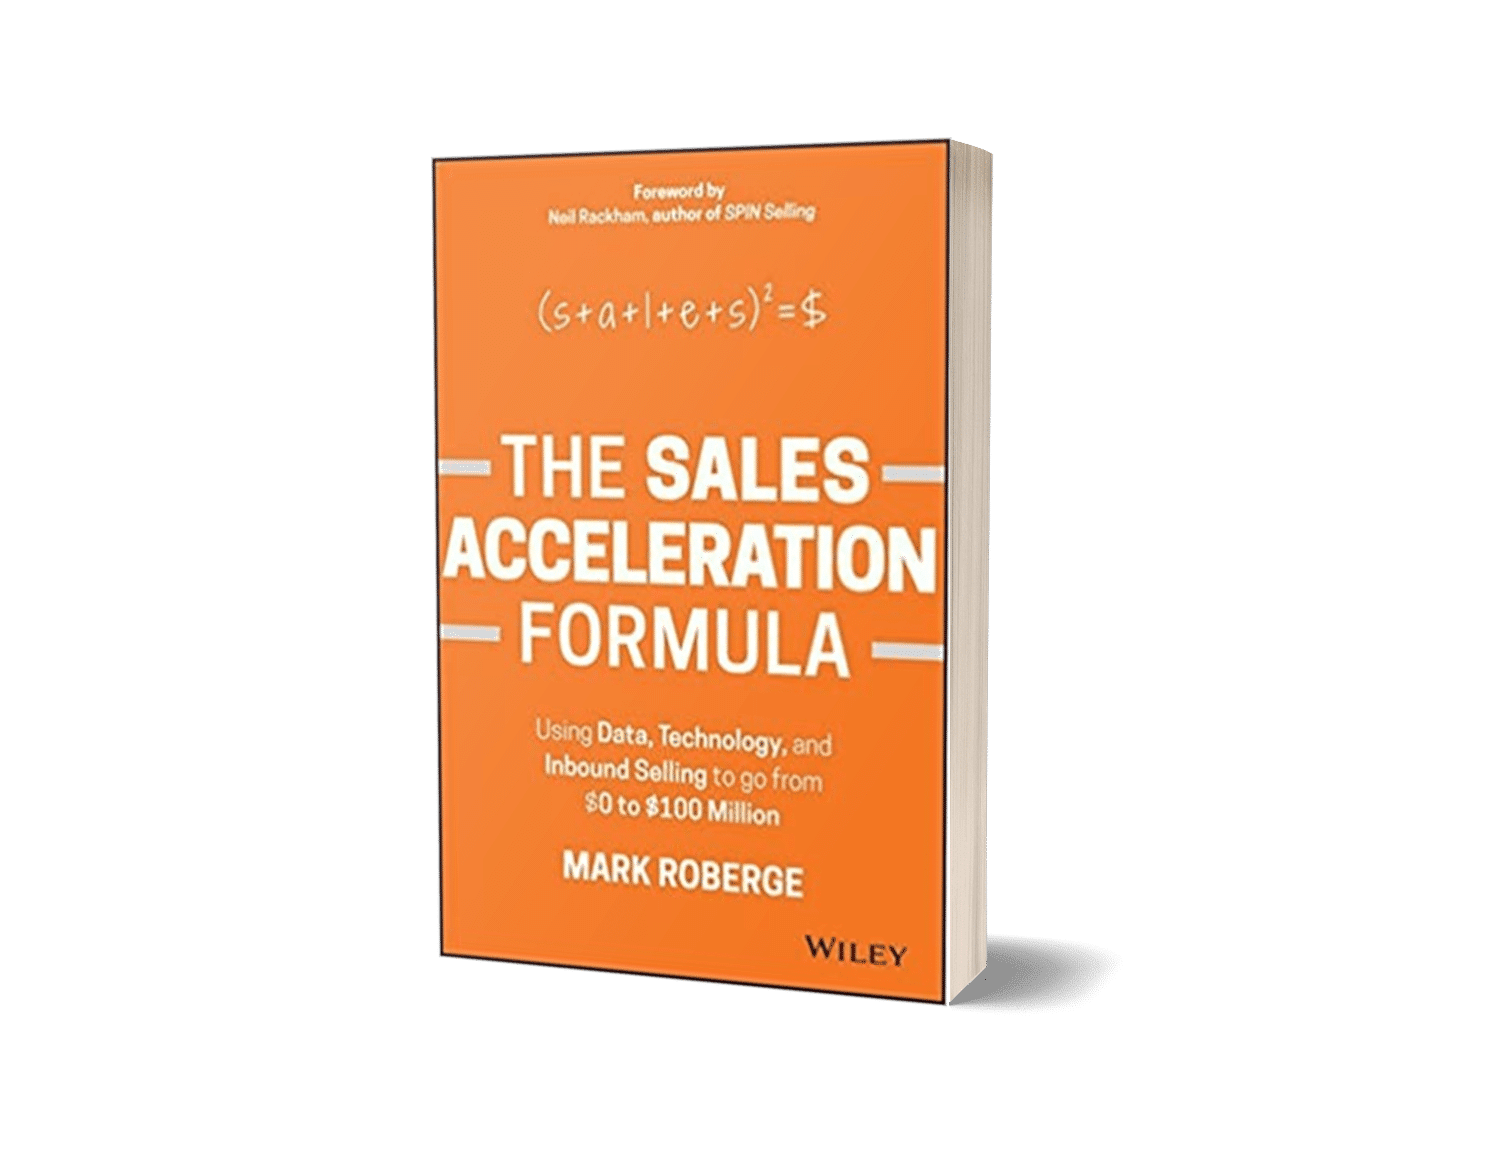 the sales acceleration formula is a good sales book